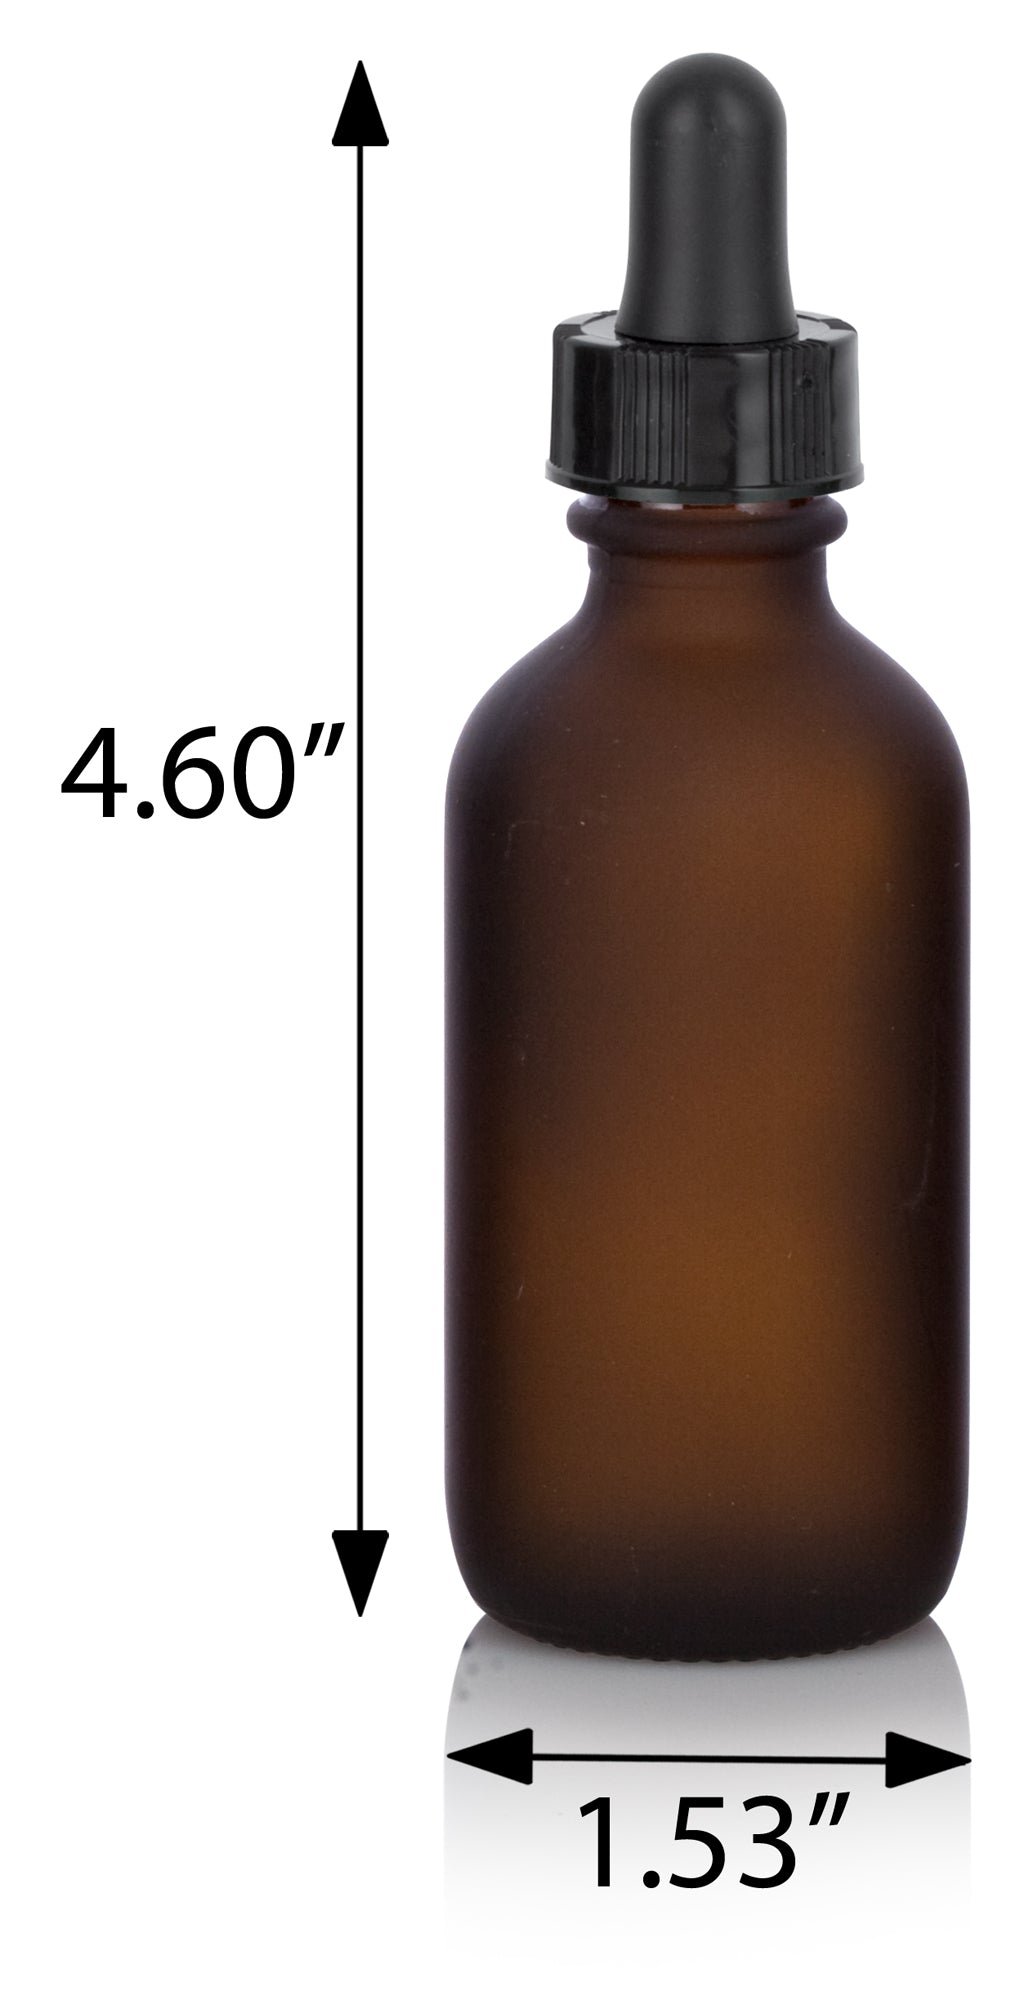 12 Pack 8 oz Amber Glass Bottles with Pumps for Essential Oils